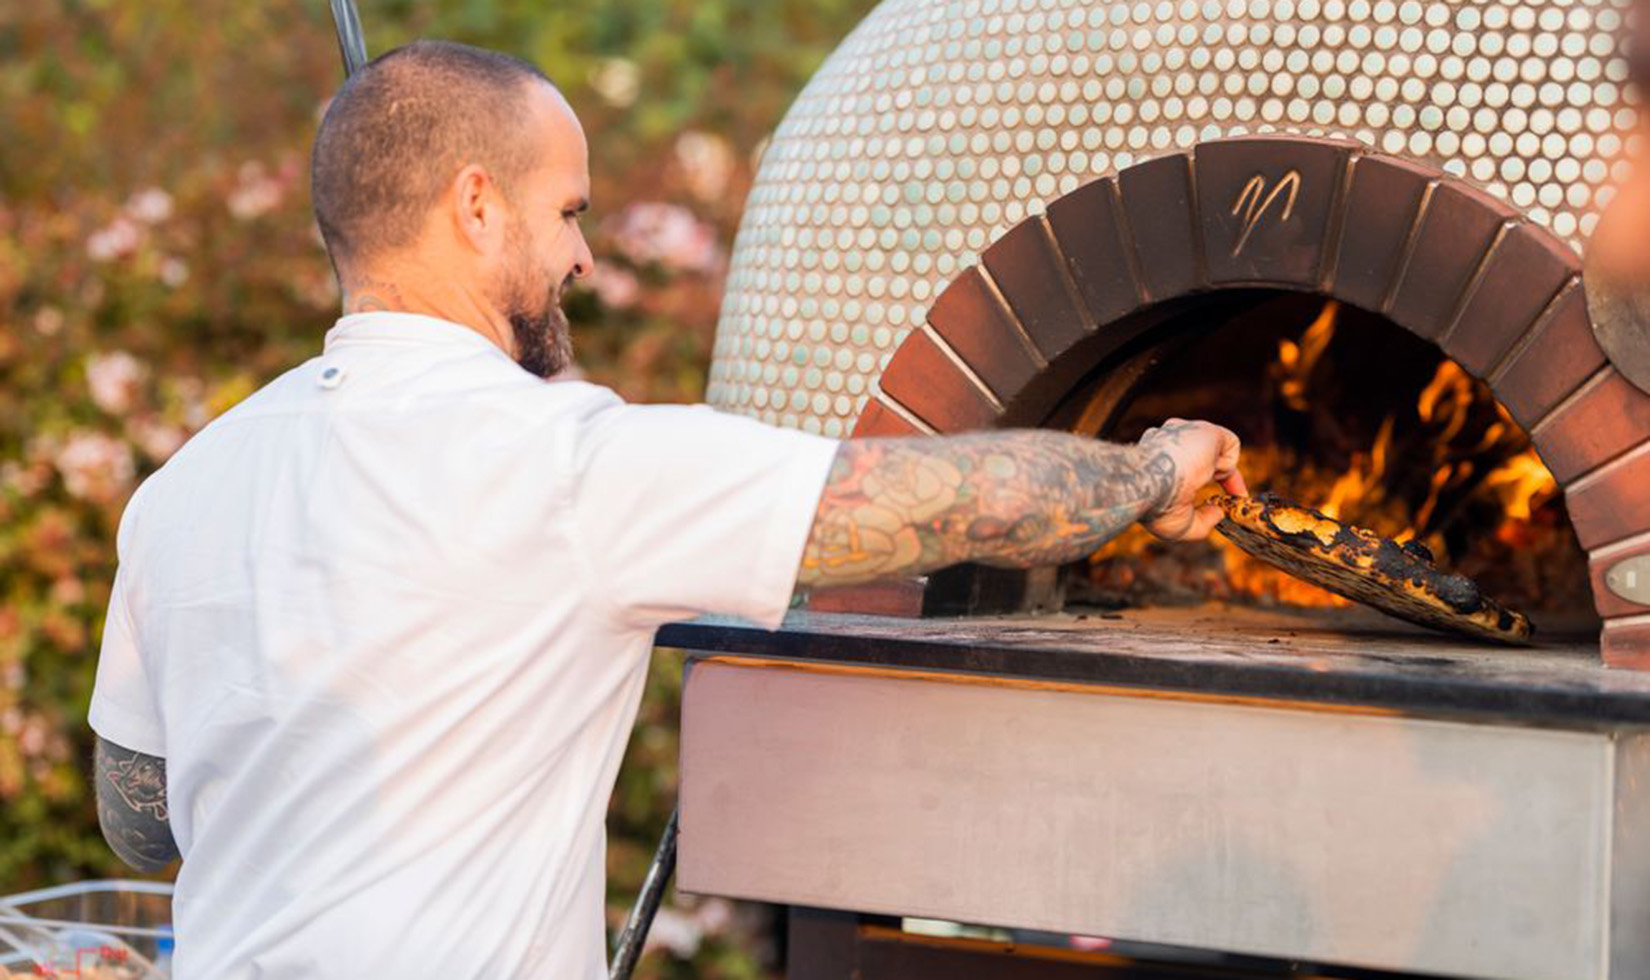 chef cooking pizza in a wood-fired oven